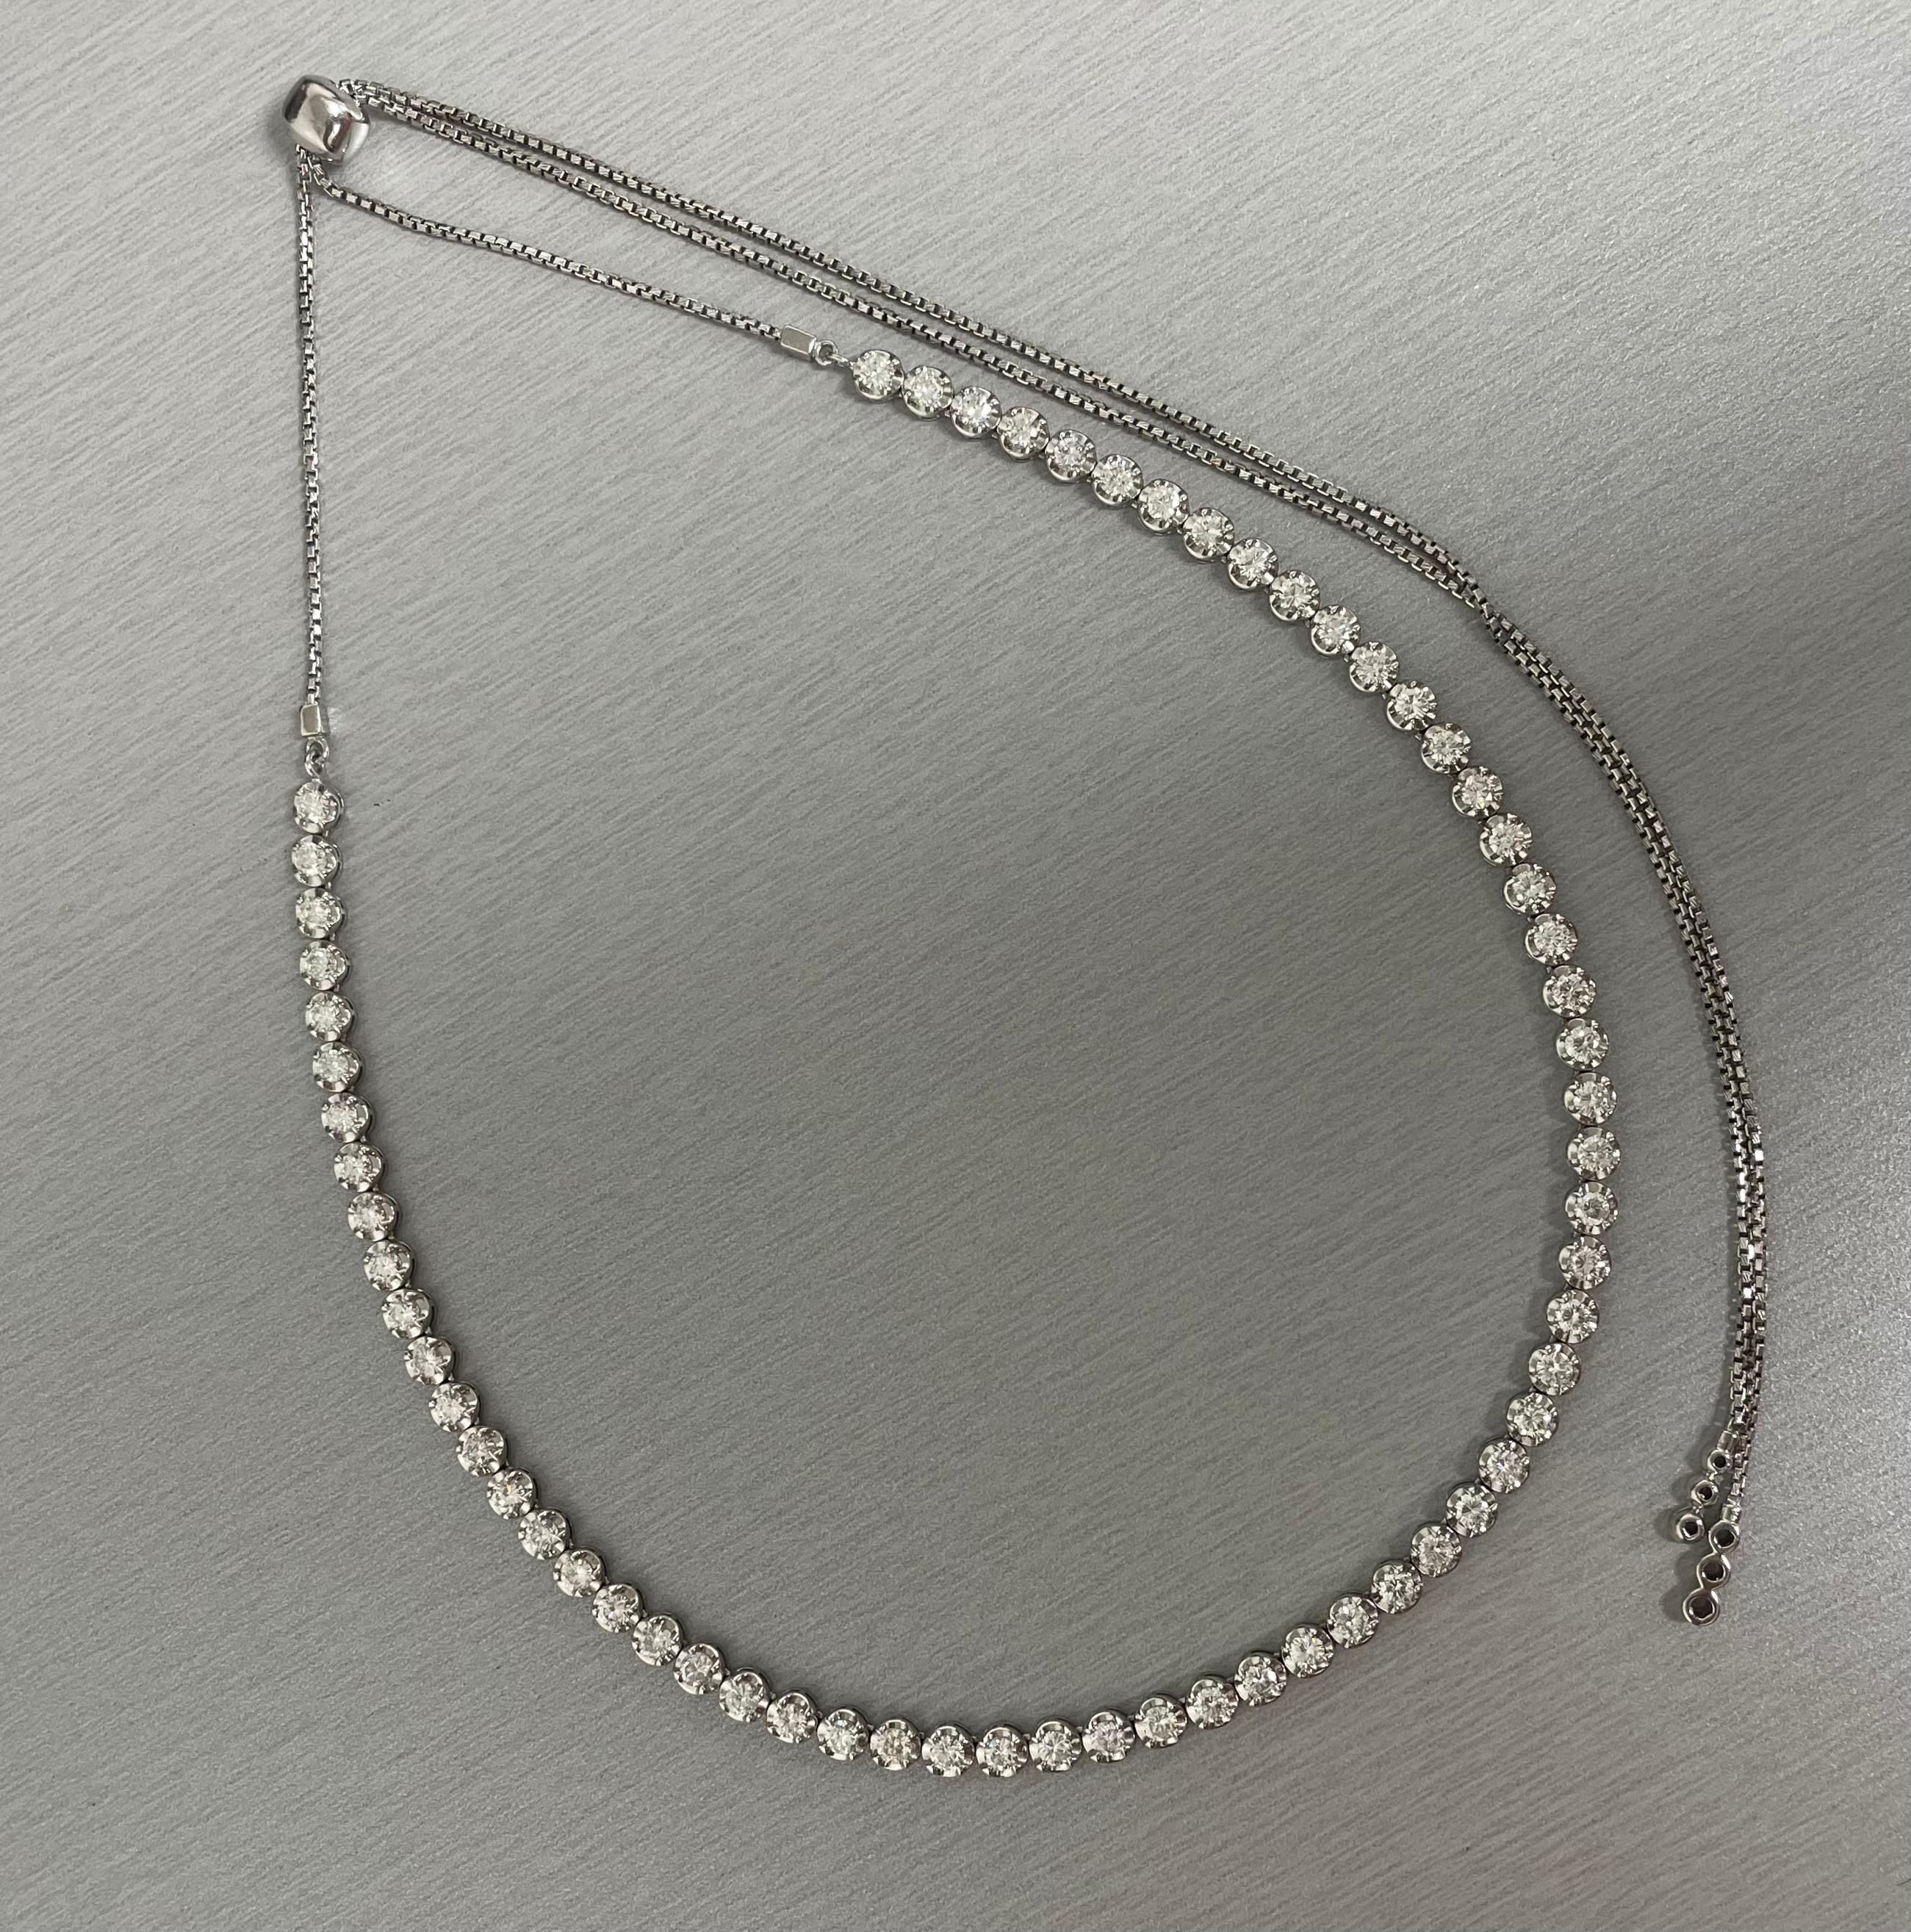 A classic and elegant everyday or occasional wear the Beauvince Adjustable Length Cupcake Tennis Necklace is a timeless and versatile piece of jewelry. It can we worn at any length between 13 inches 30 inches ranging from a choker to a long